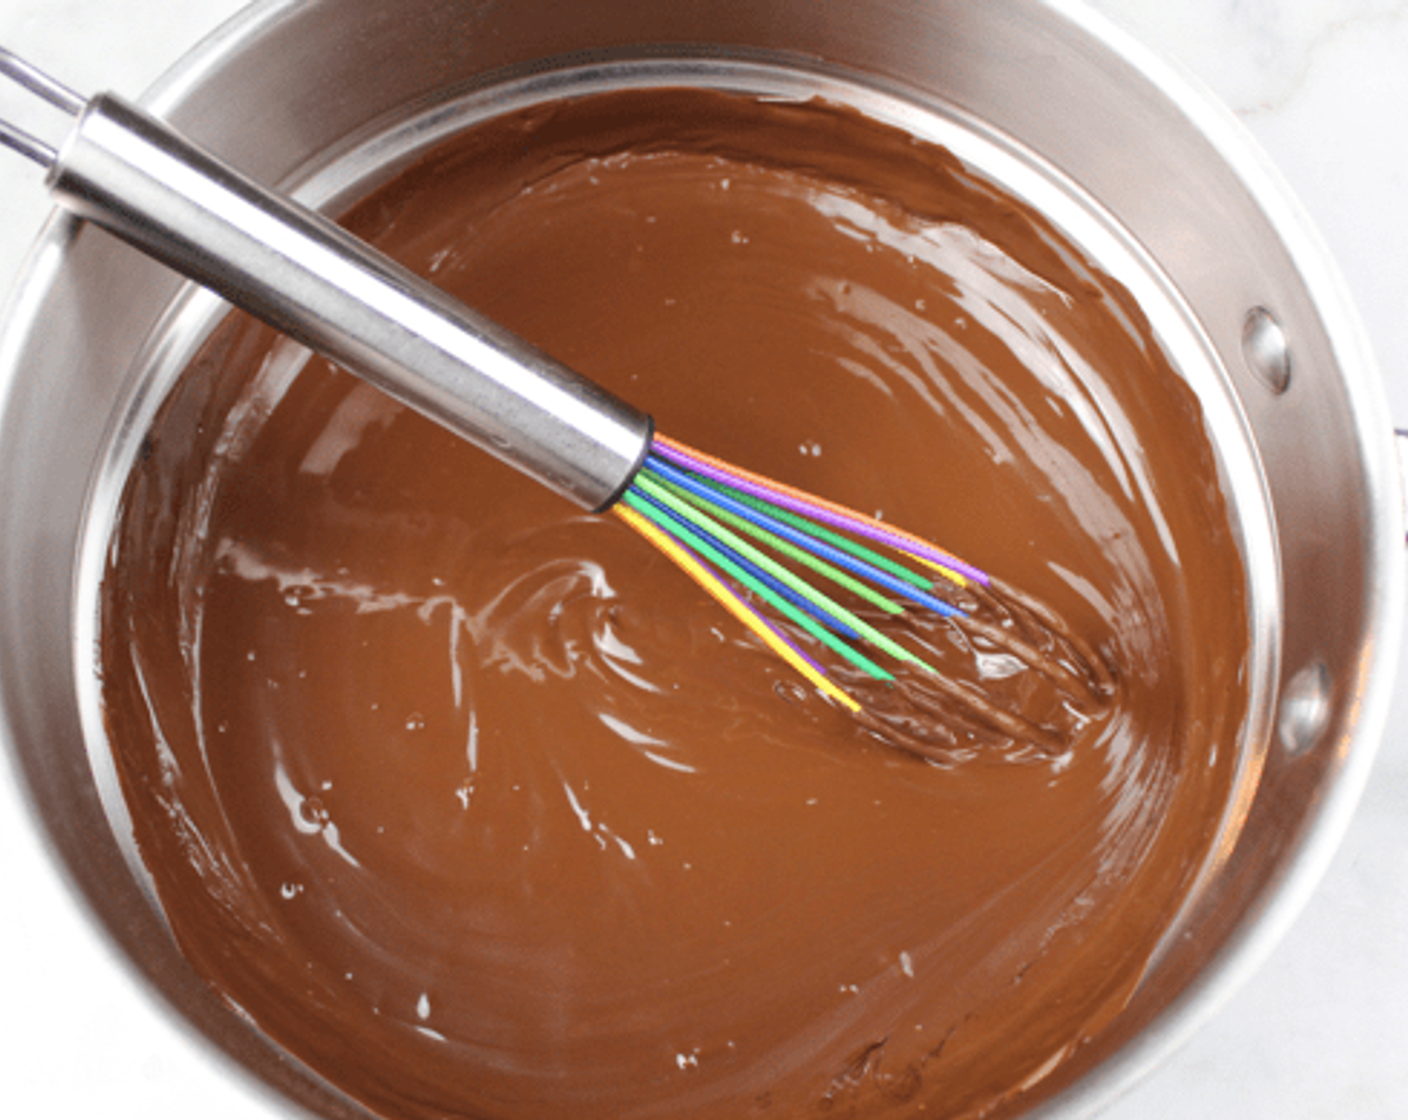 step 3 Mix the Instant Espresso Powder (1 Tbsp) with the Heavy Cream (3/4 cup). Pour this mixture over the chocolate & whisk together until you have created a beautiful ganache. The cream & chocolate will become smooth & uniform in color. Refrigerate for at least 2 hours.